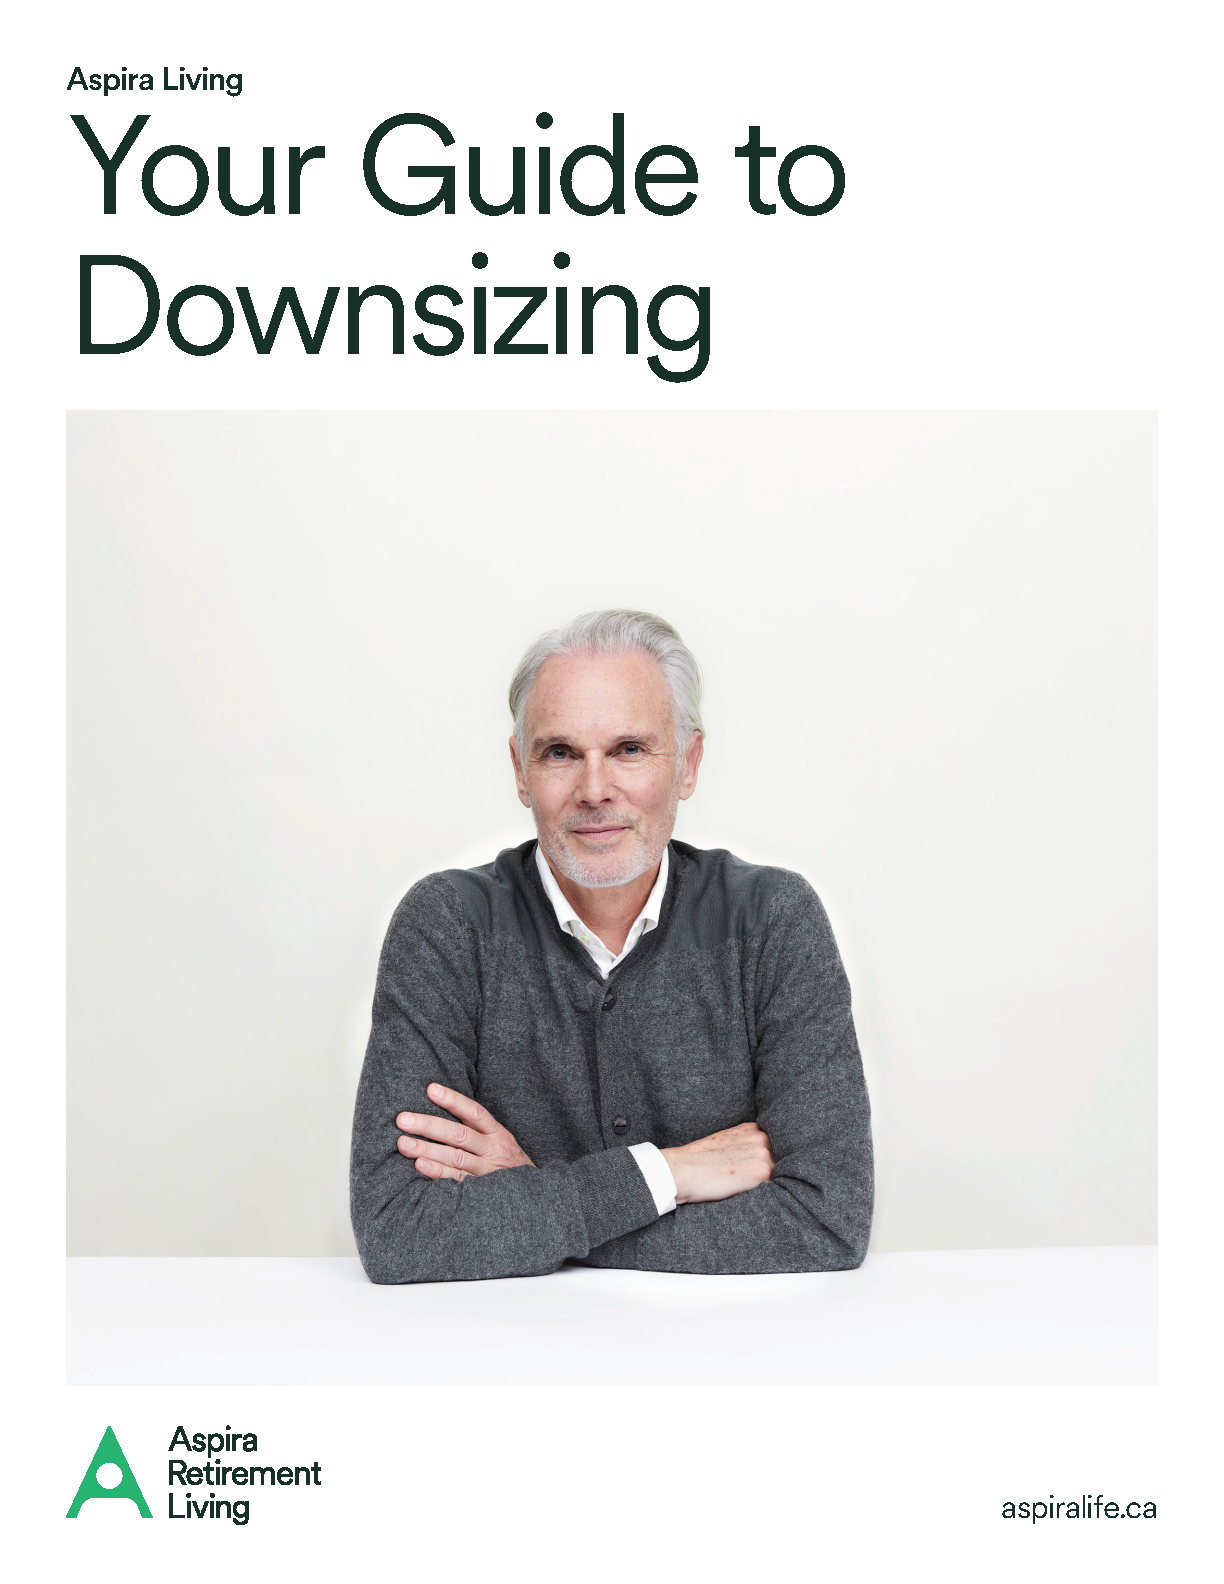 Your Guide to Downsizing by Aspira Retirement Living_Page1